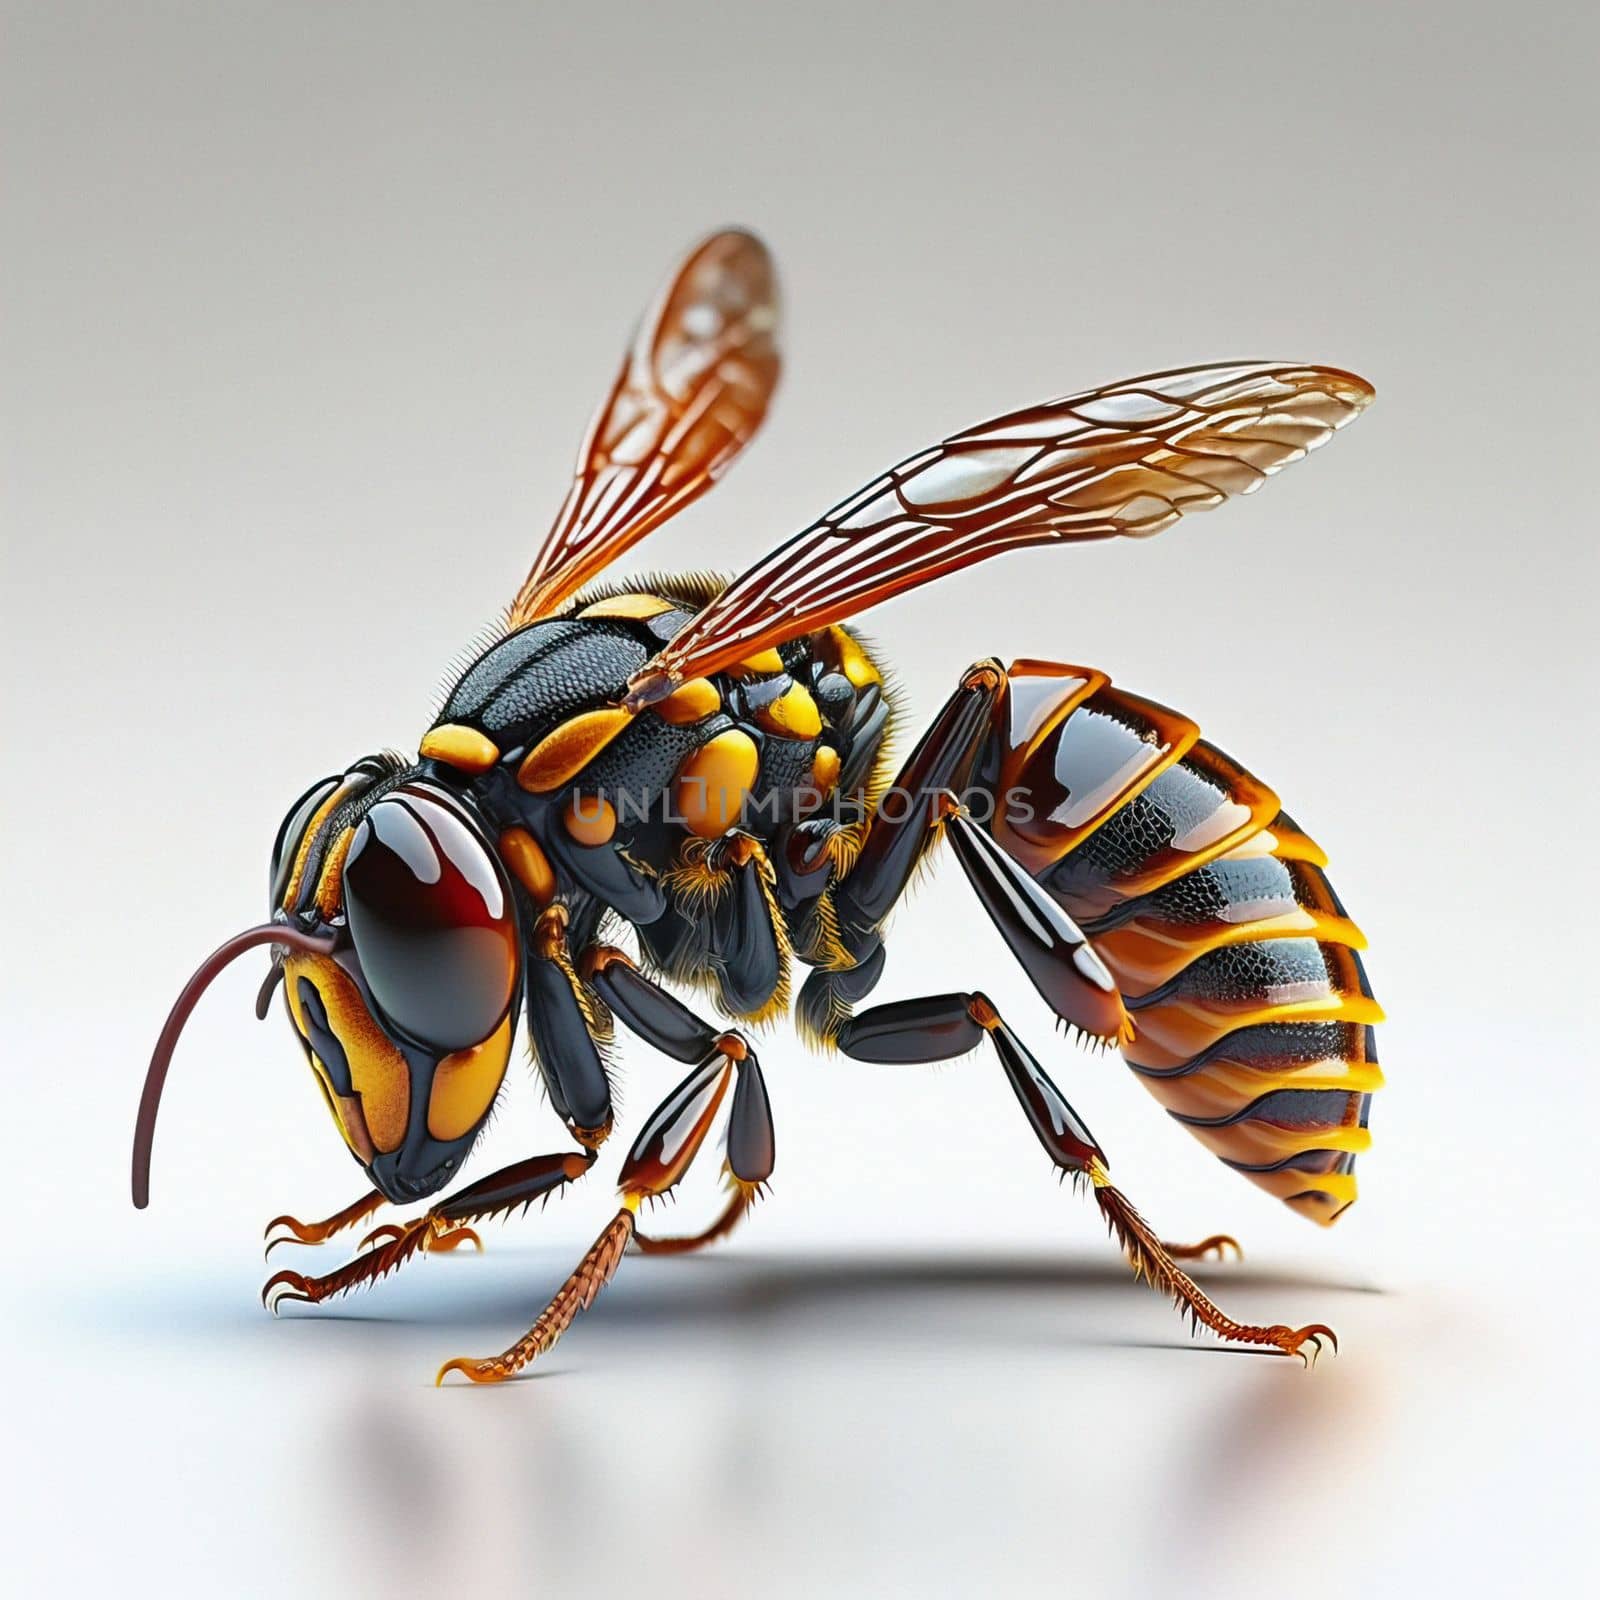 3d hornet render modelling images. Bee isolated on white background. Download image